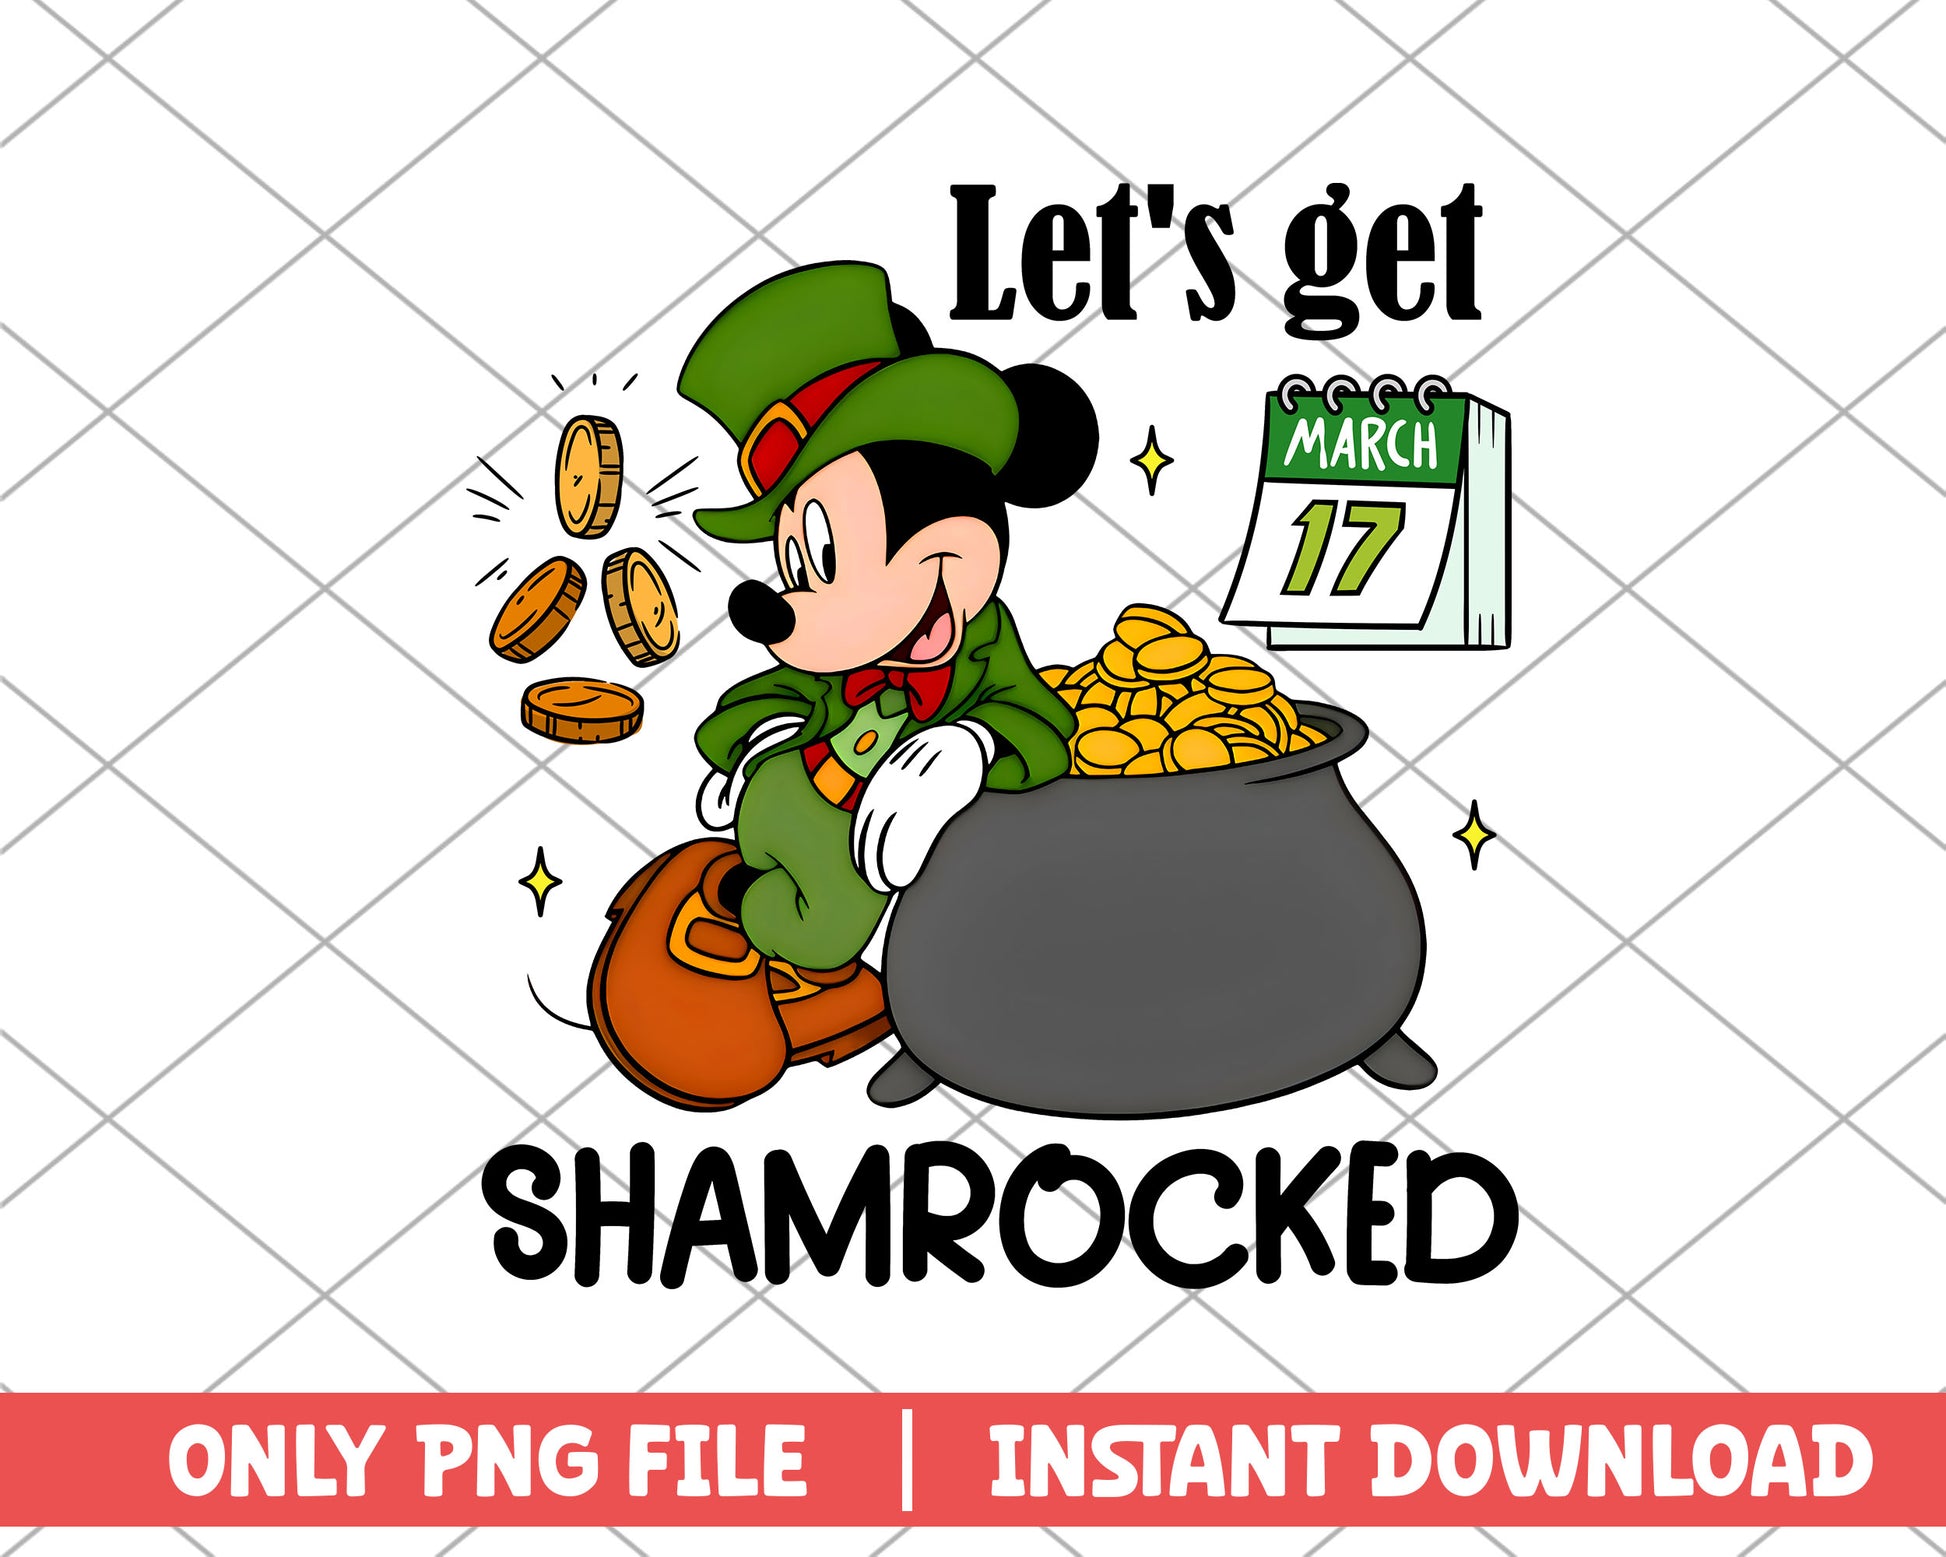 Mickey let's get shamrocked  st.patrick day png 